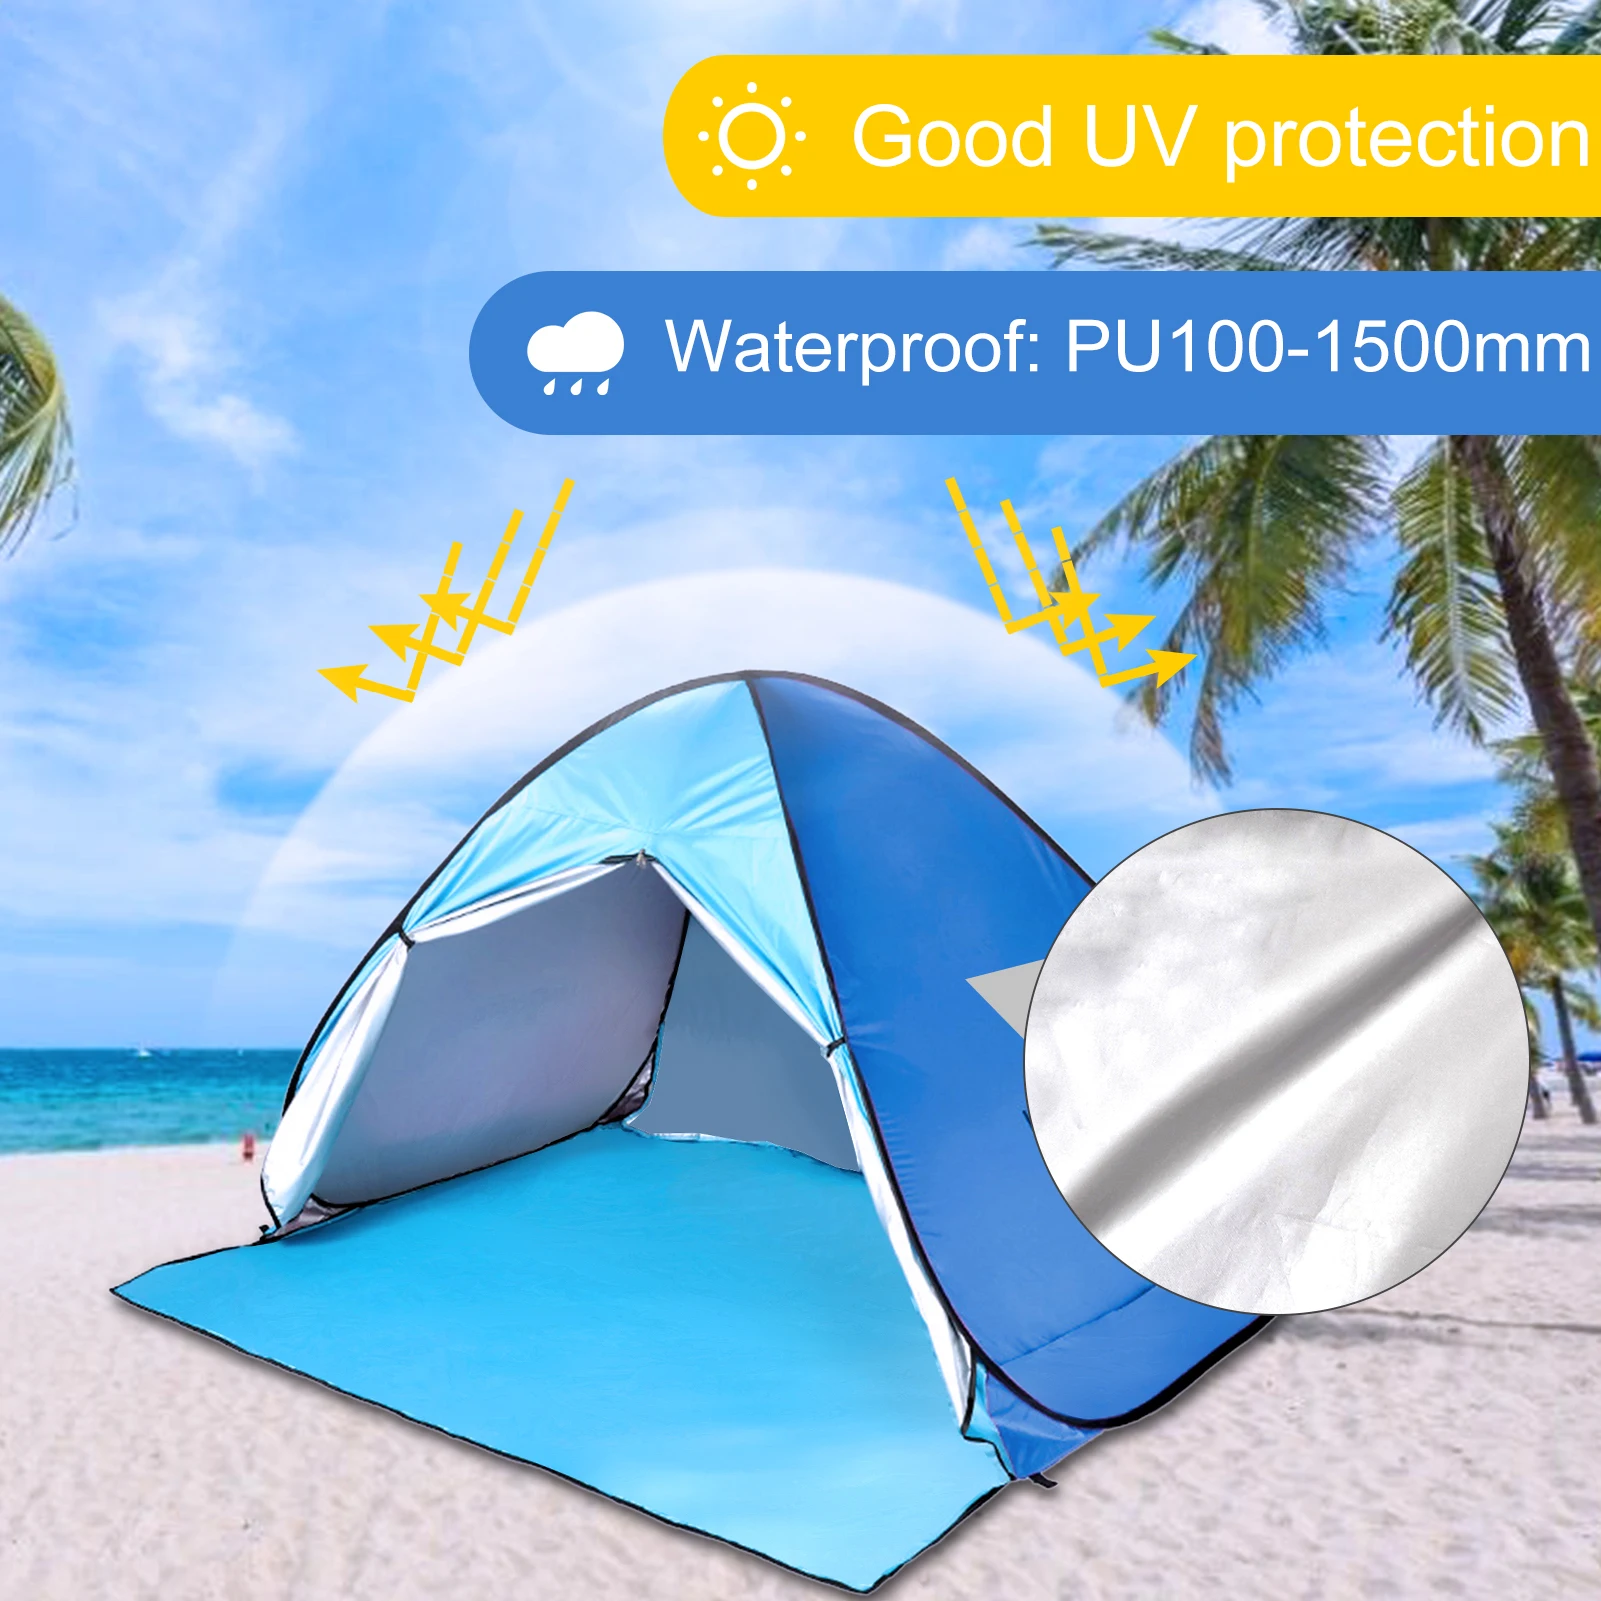 Blue 4 People Pop Up Beach Tent Portable Sun Shelter UV Protection Shade Cabana for Outdoor Activities and Beach Traveling 